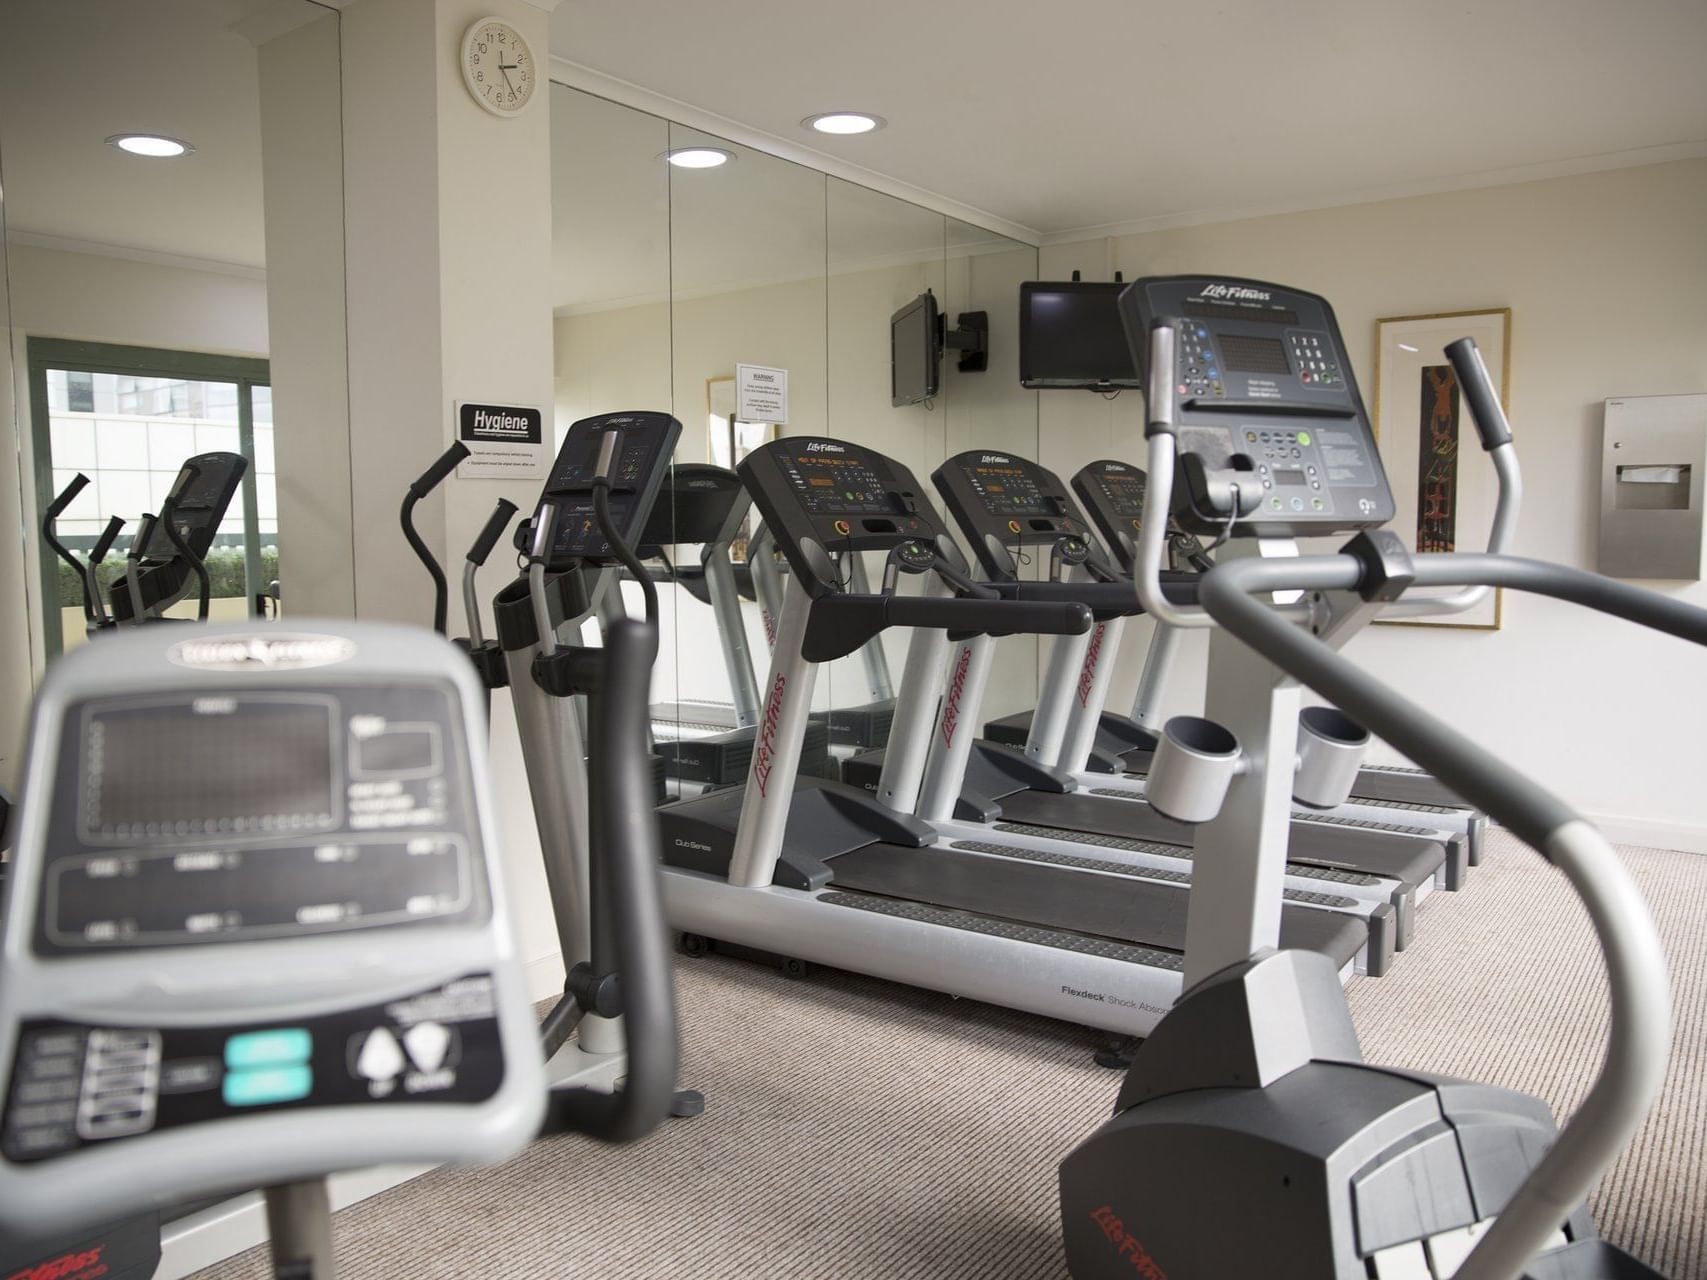 Fitness area at the Sebel Residence Chatswood